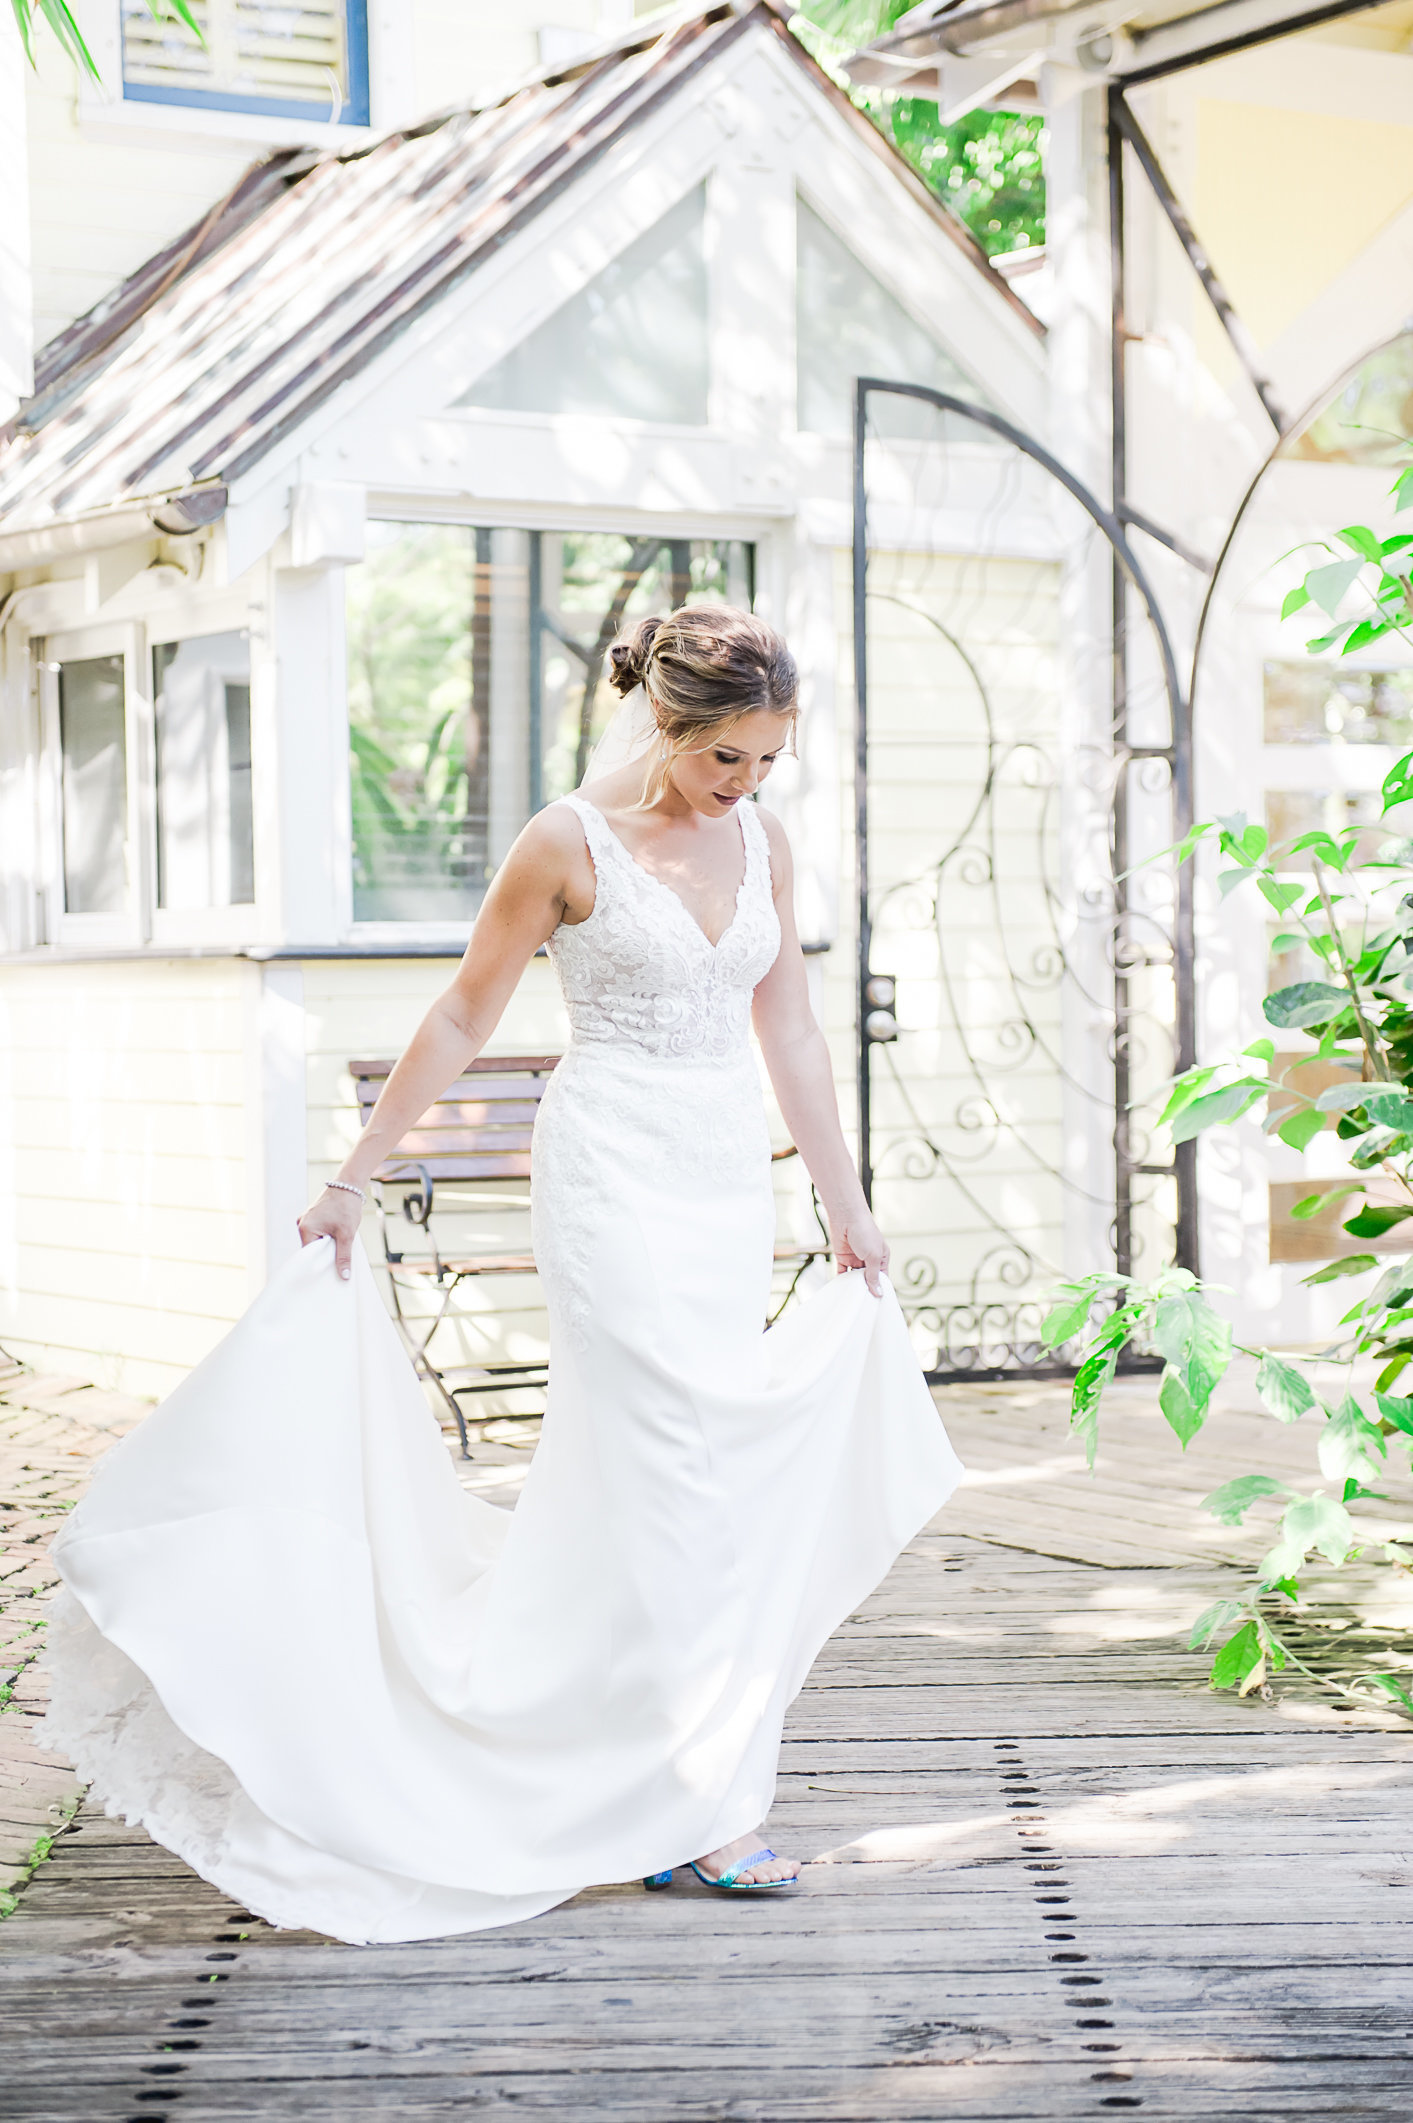 Twirling Bride - Sundy House by Palm Beach Photography, Inc.